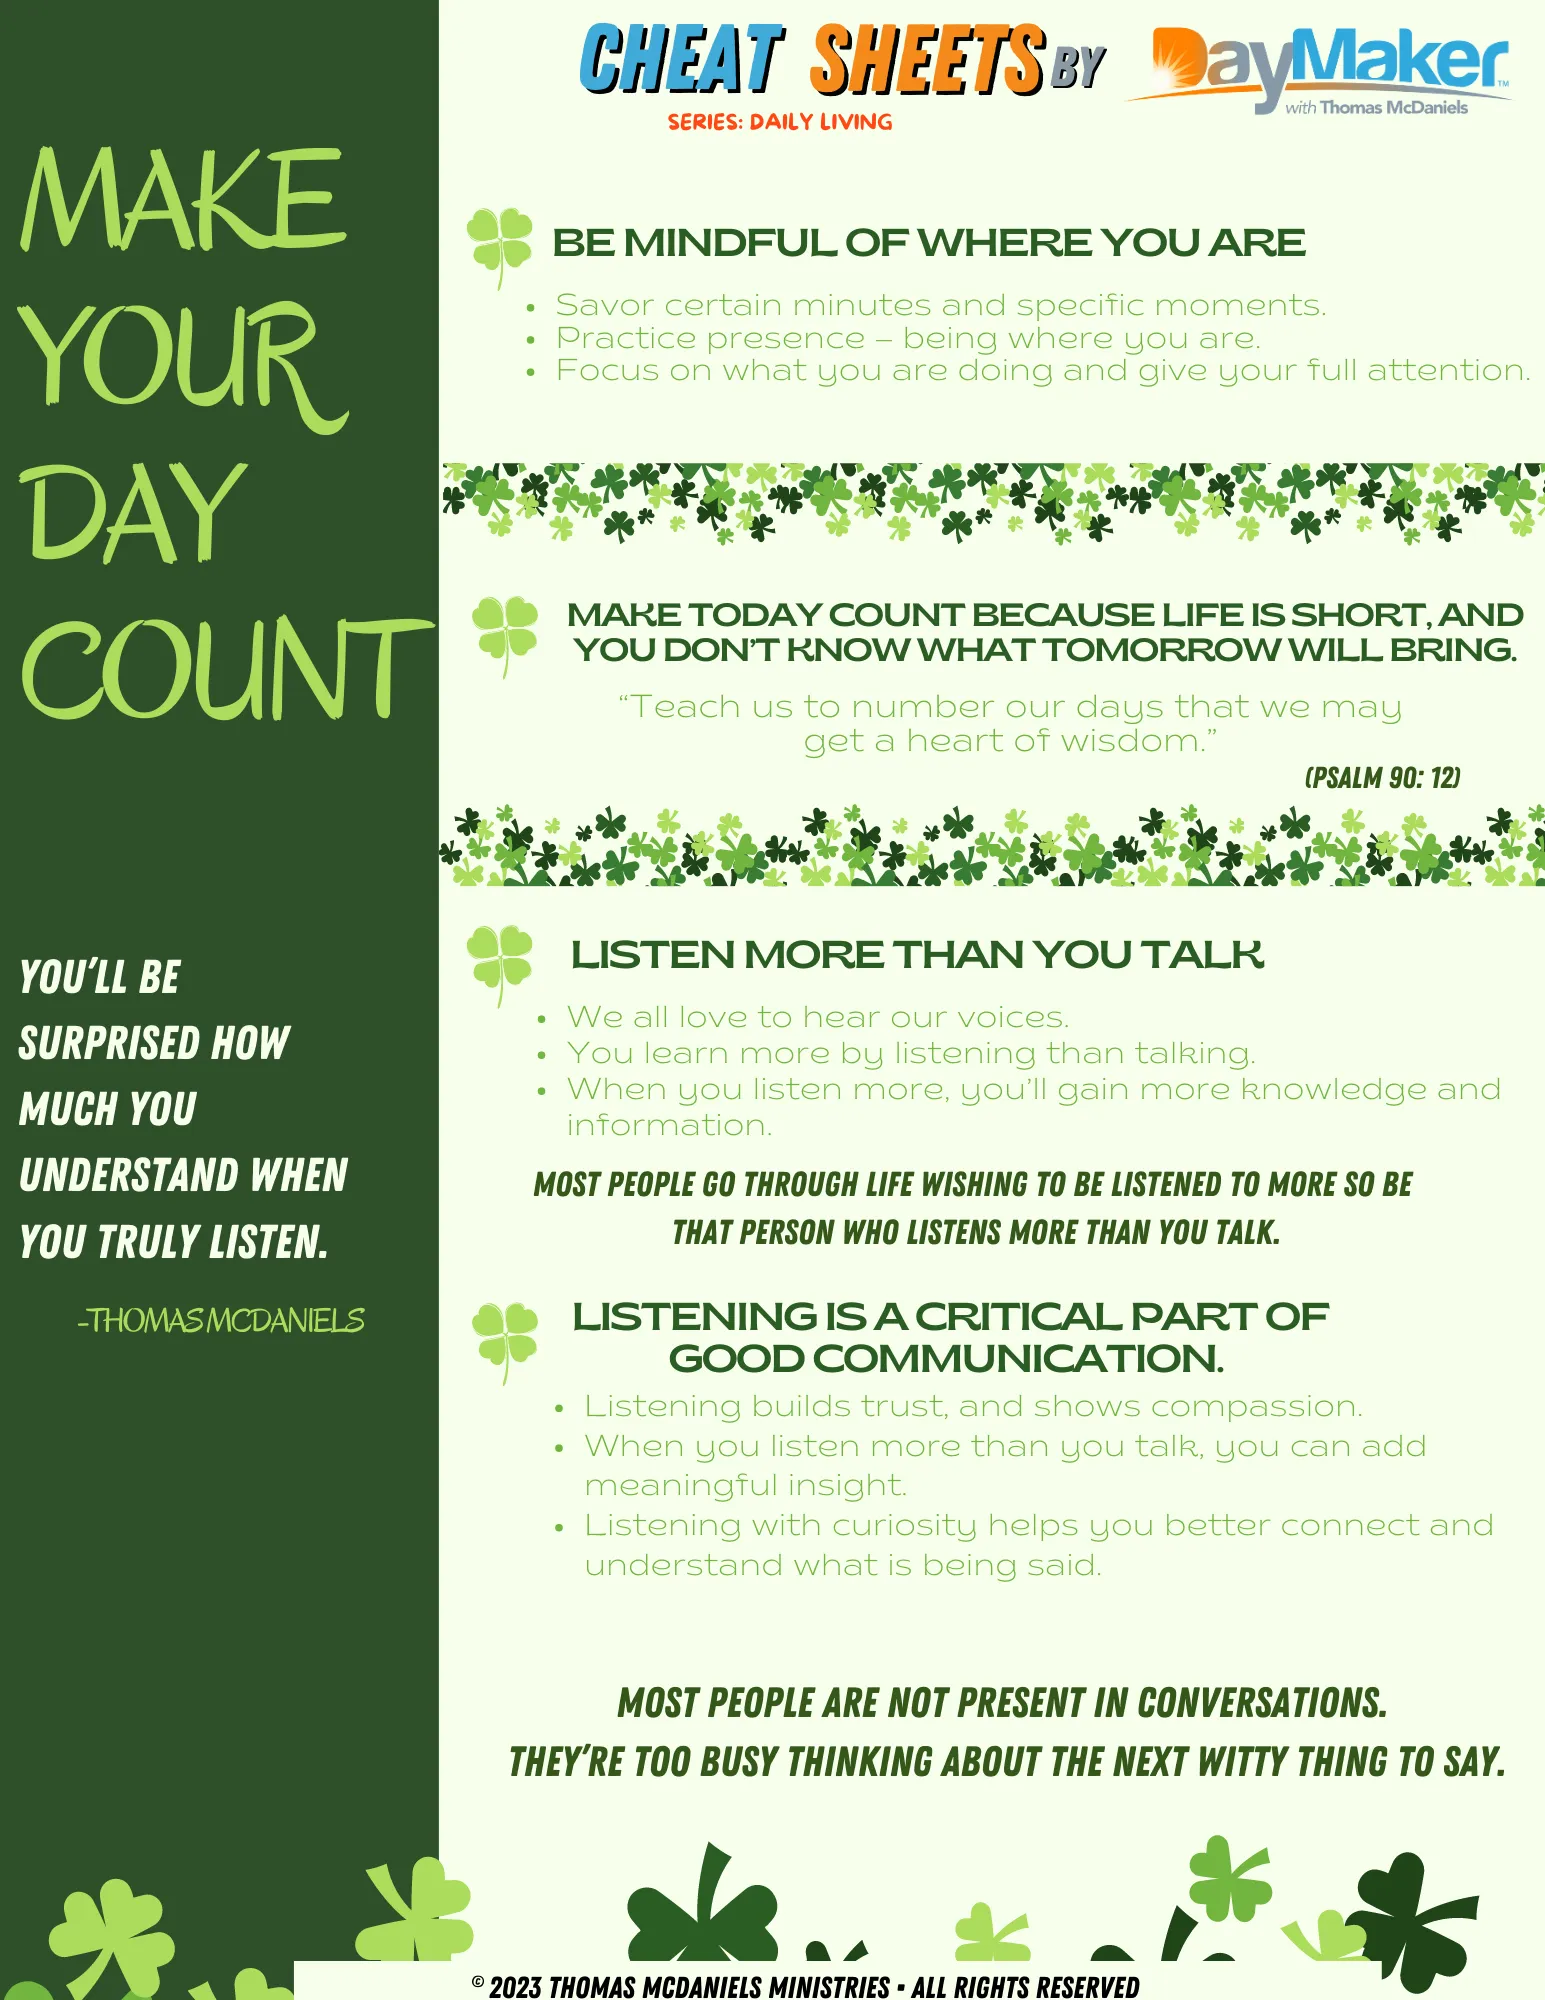 Cheat Sheets By DayMaker ~ Make the Day Count